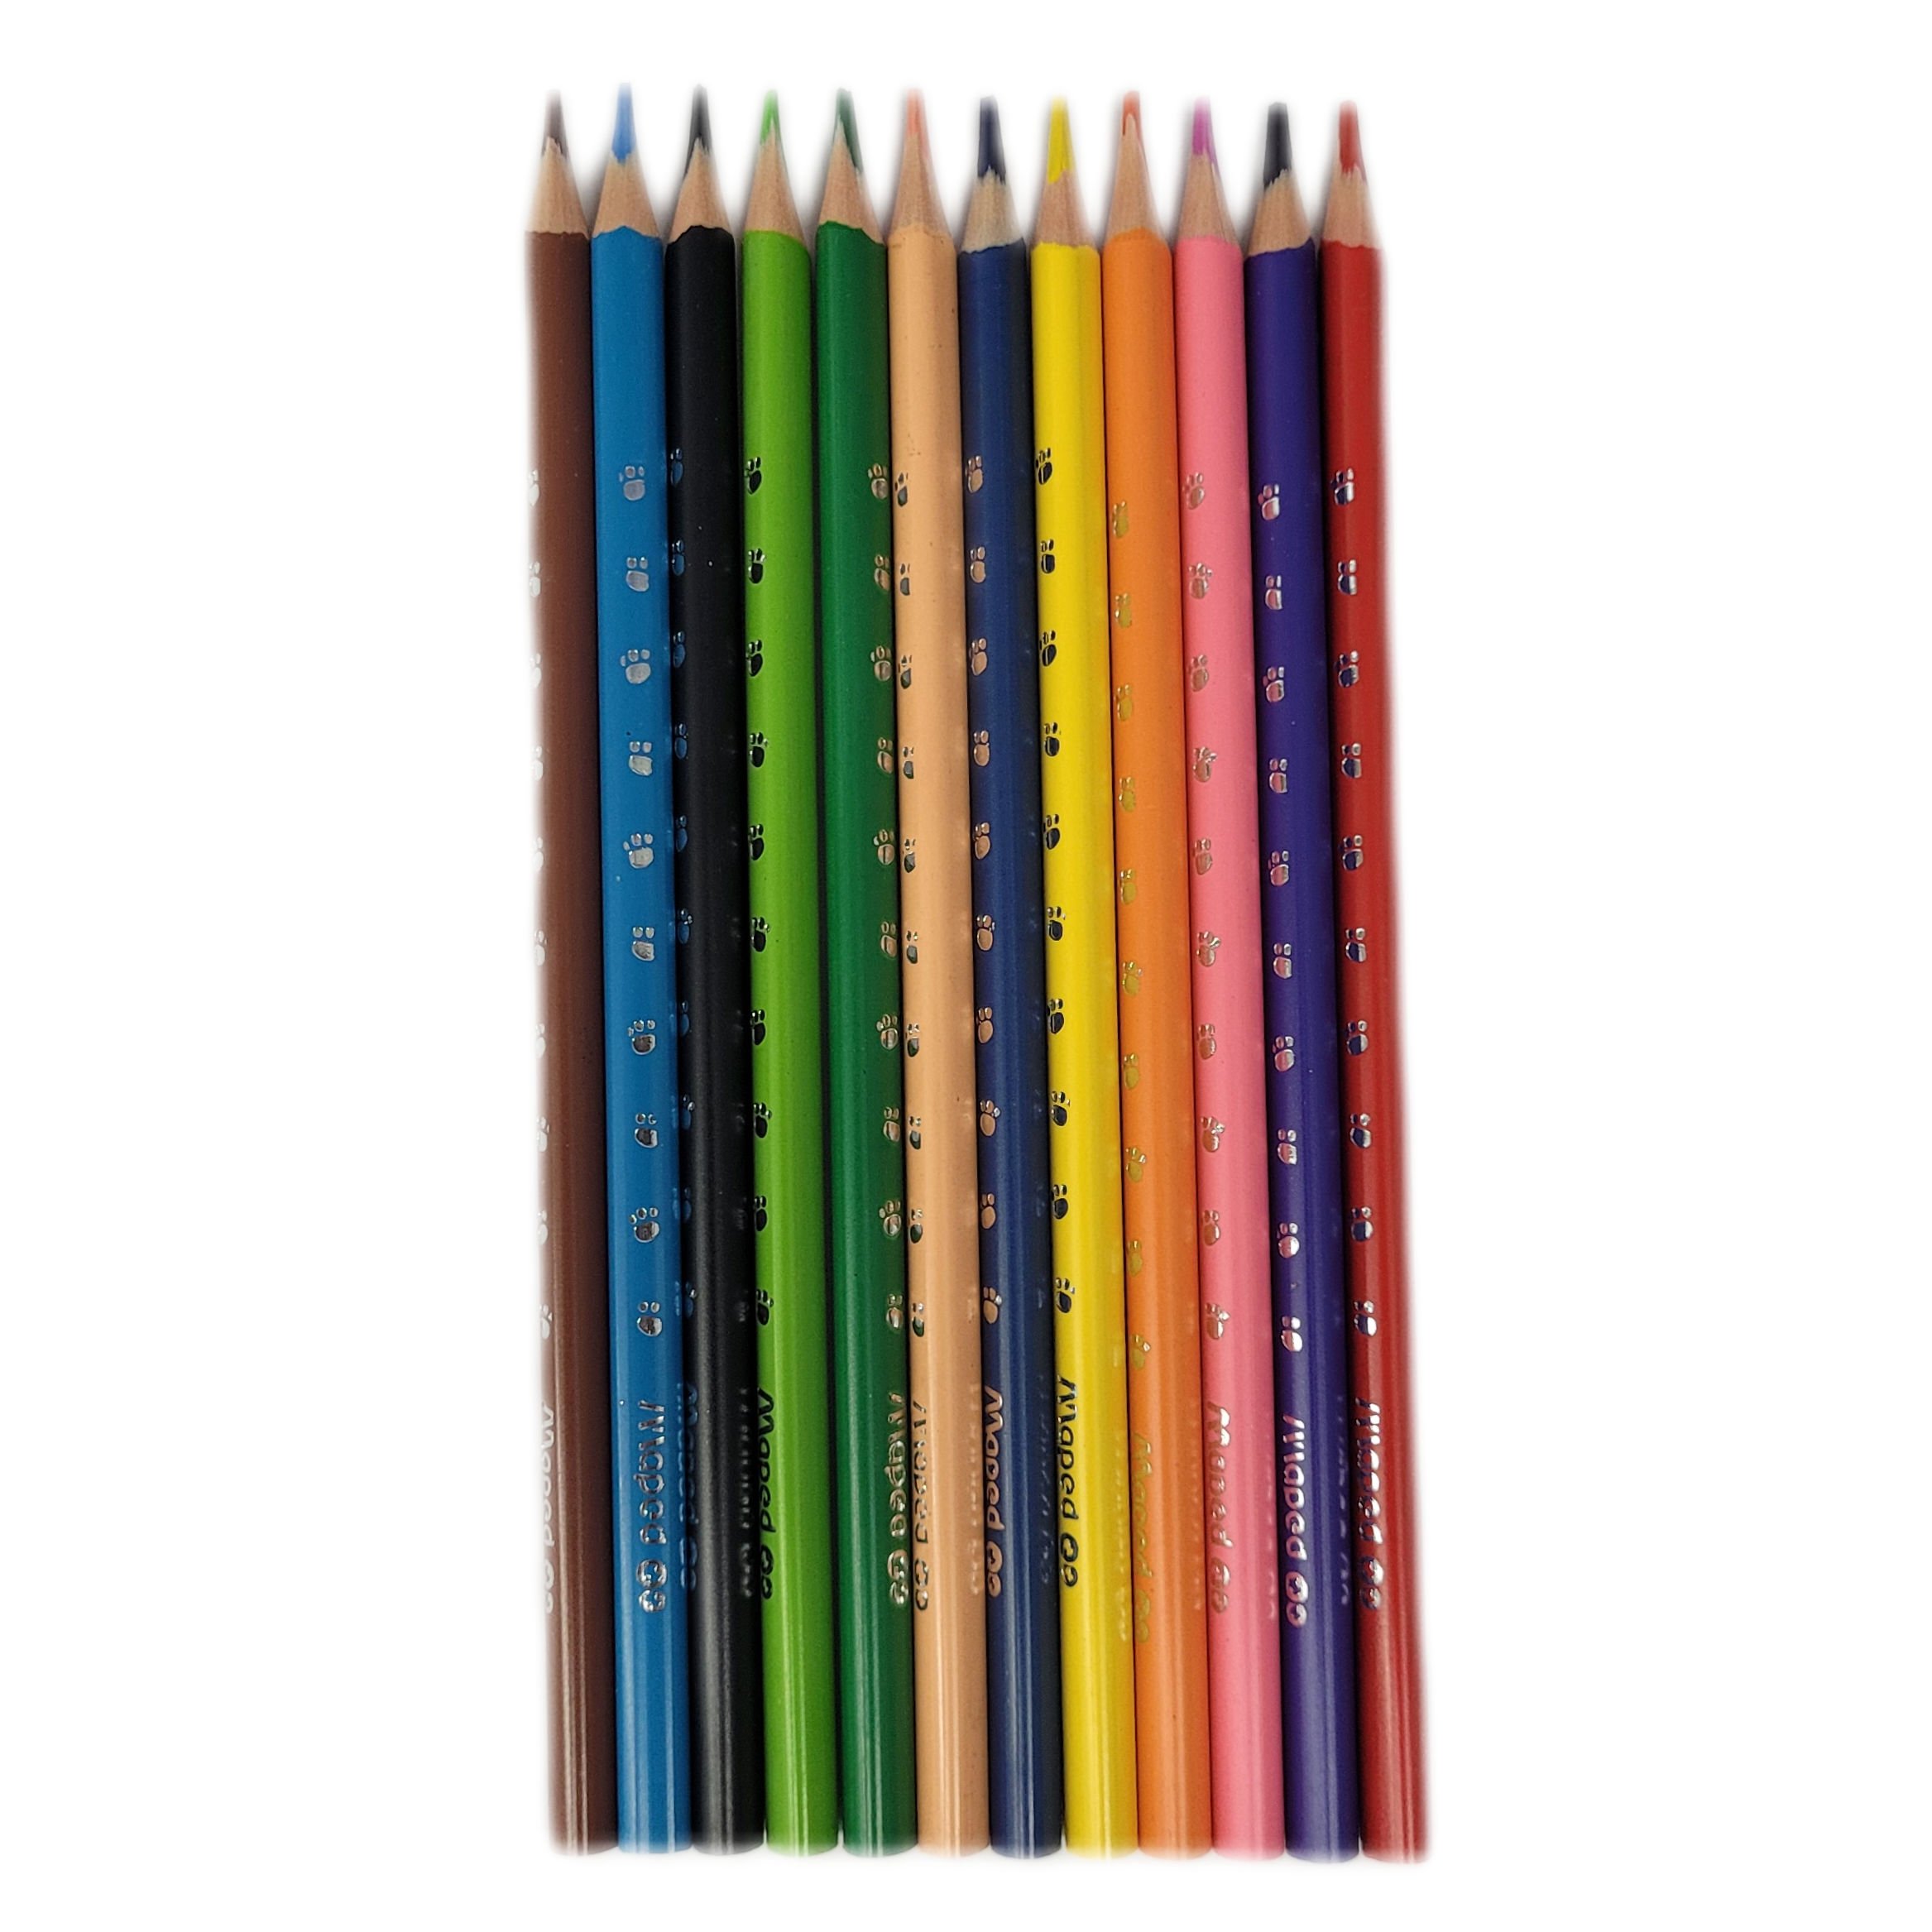 MAPED COLOR'PEPS STAR - BOX OF 6 PENCILS - Thef:;llstop